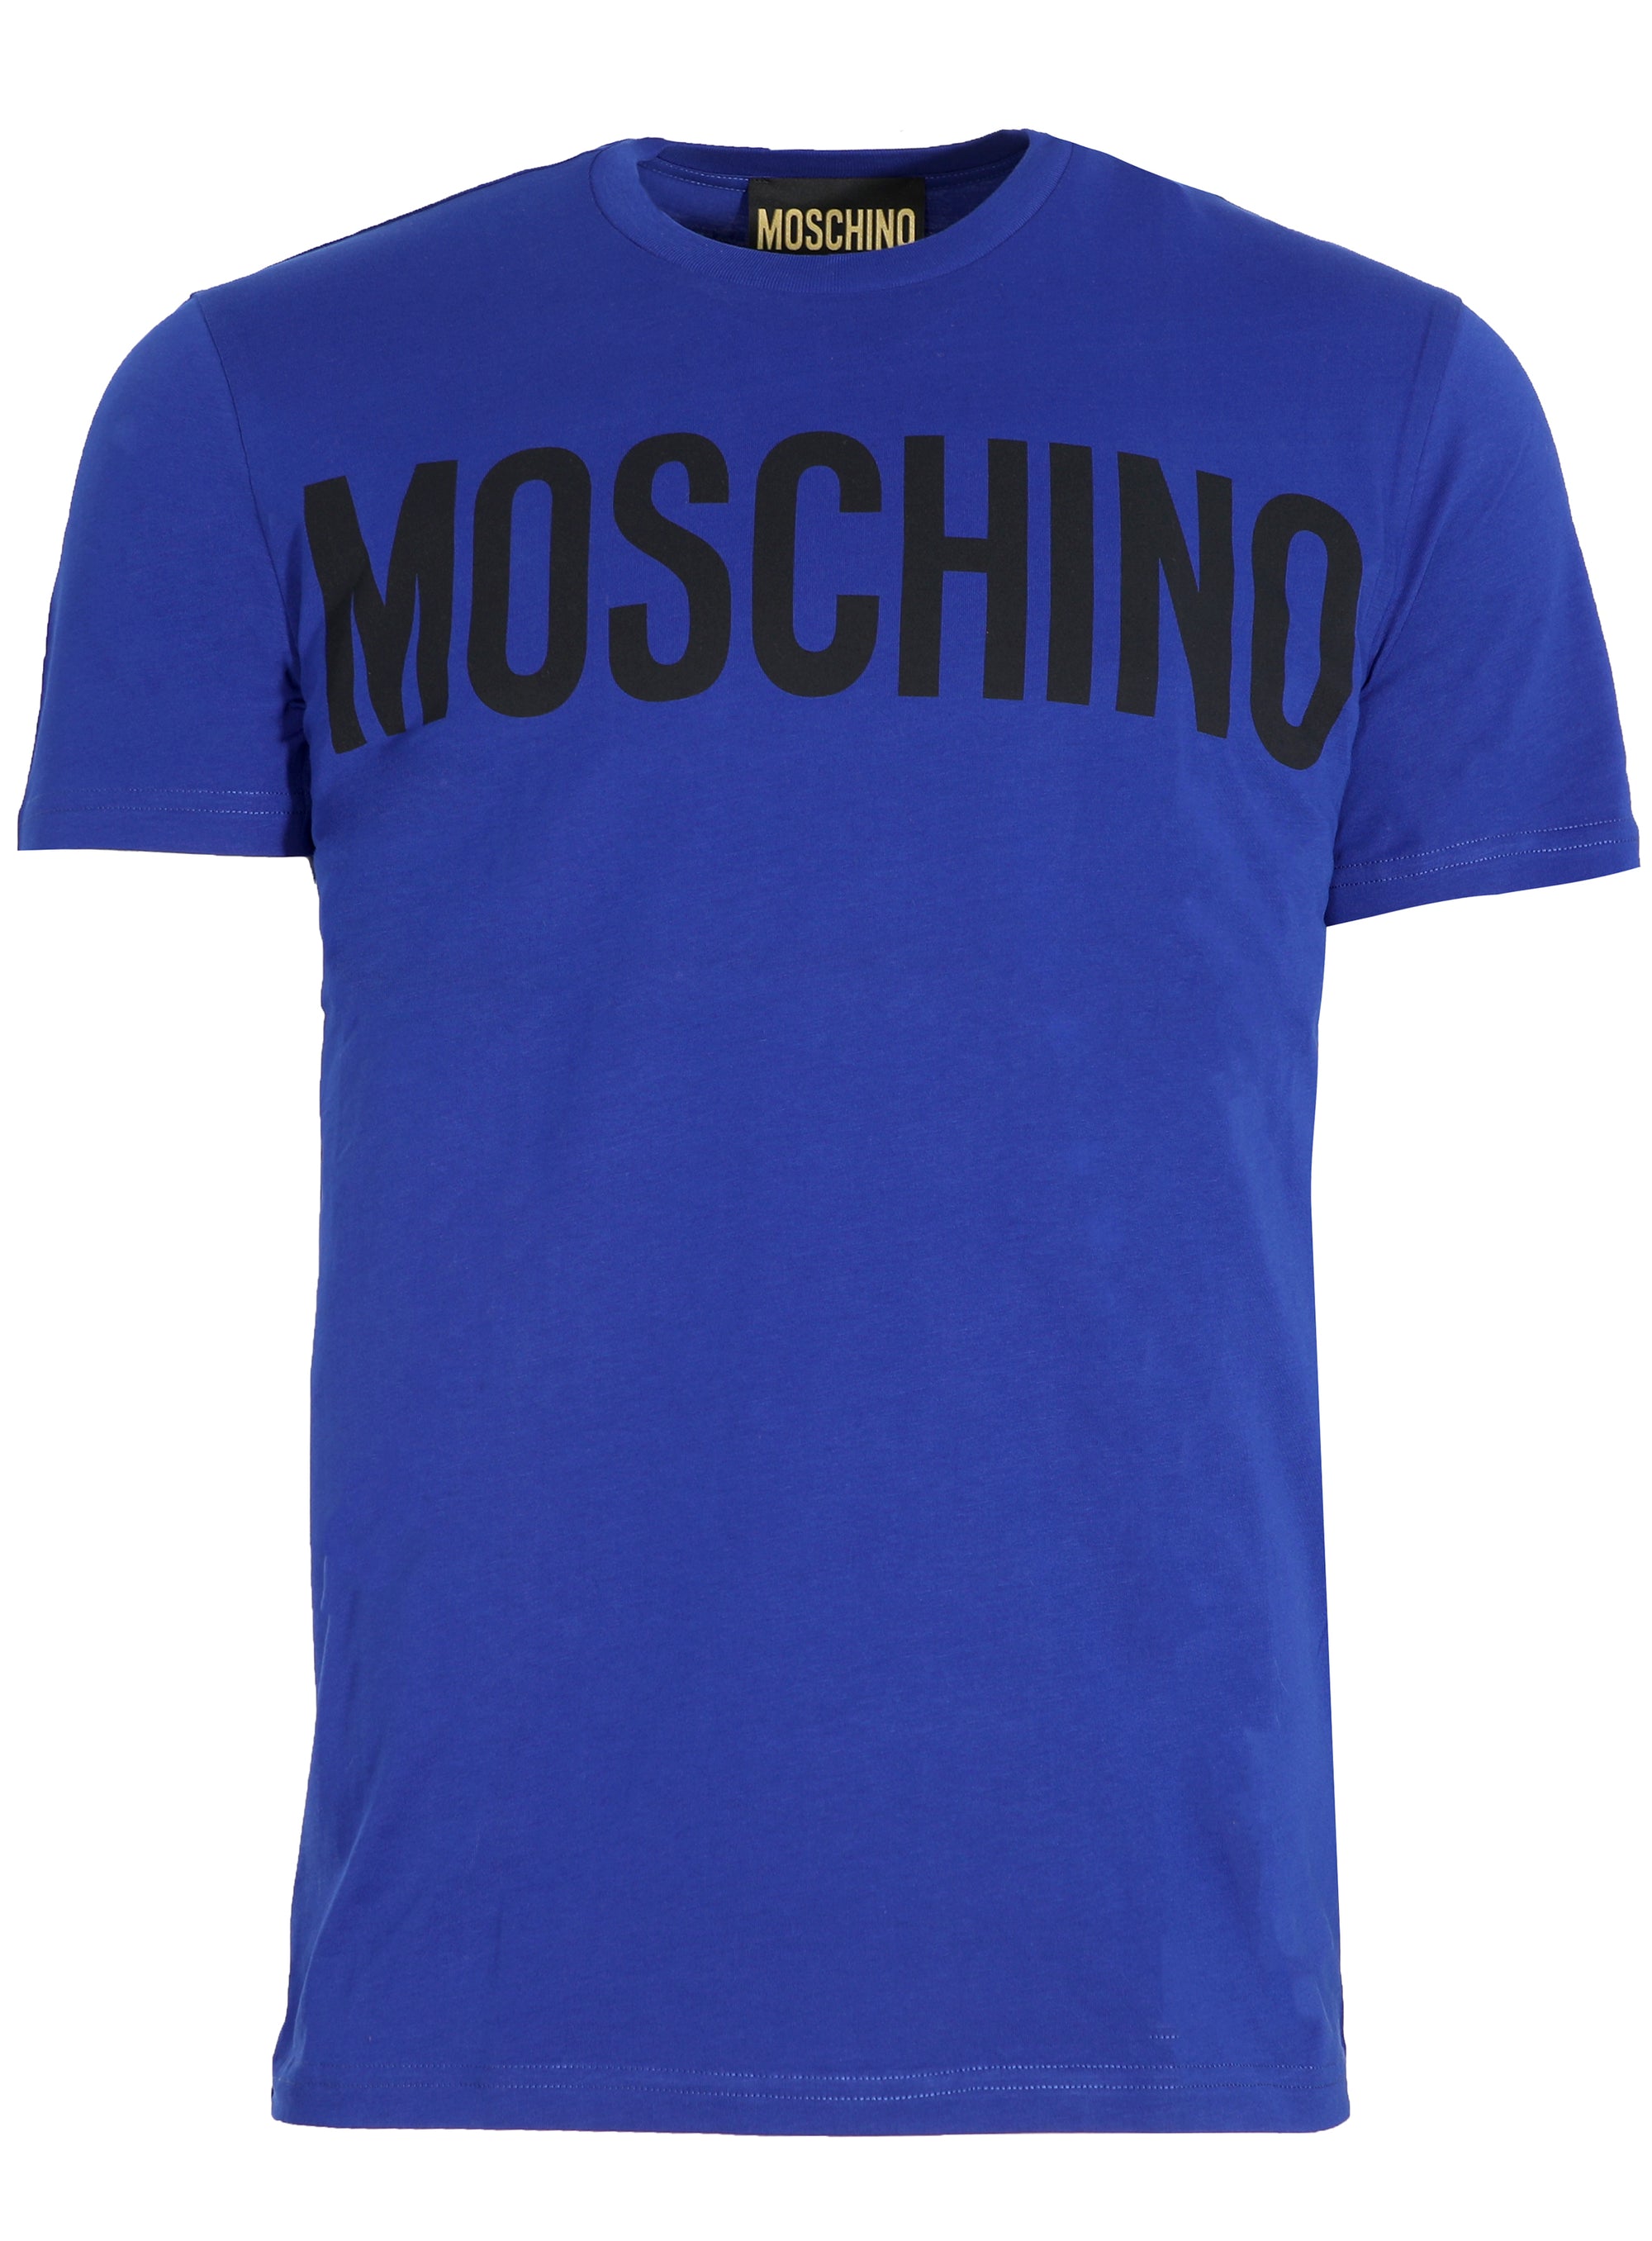 STRETCH JERSEY T-SHIRT WITH LOGO - ROYAL BLUE